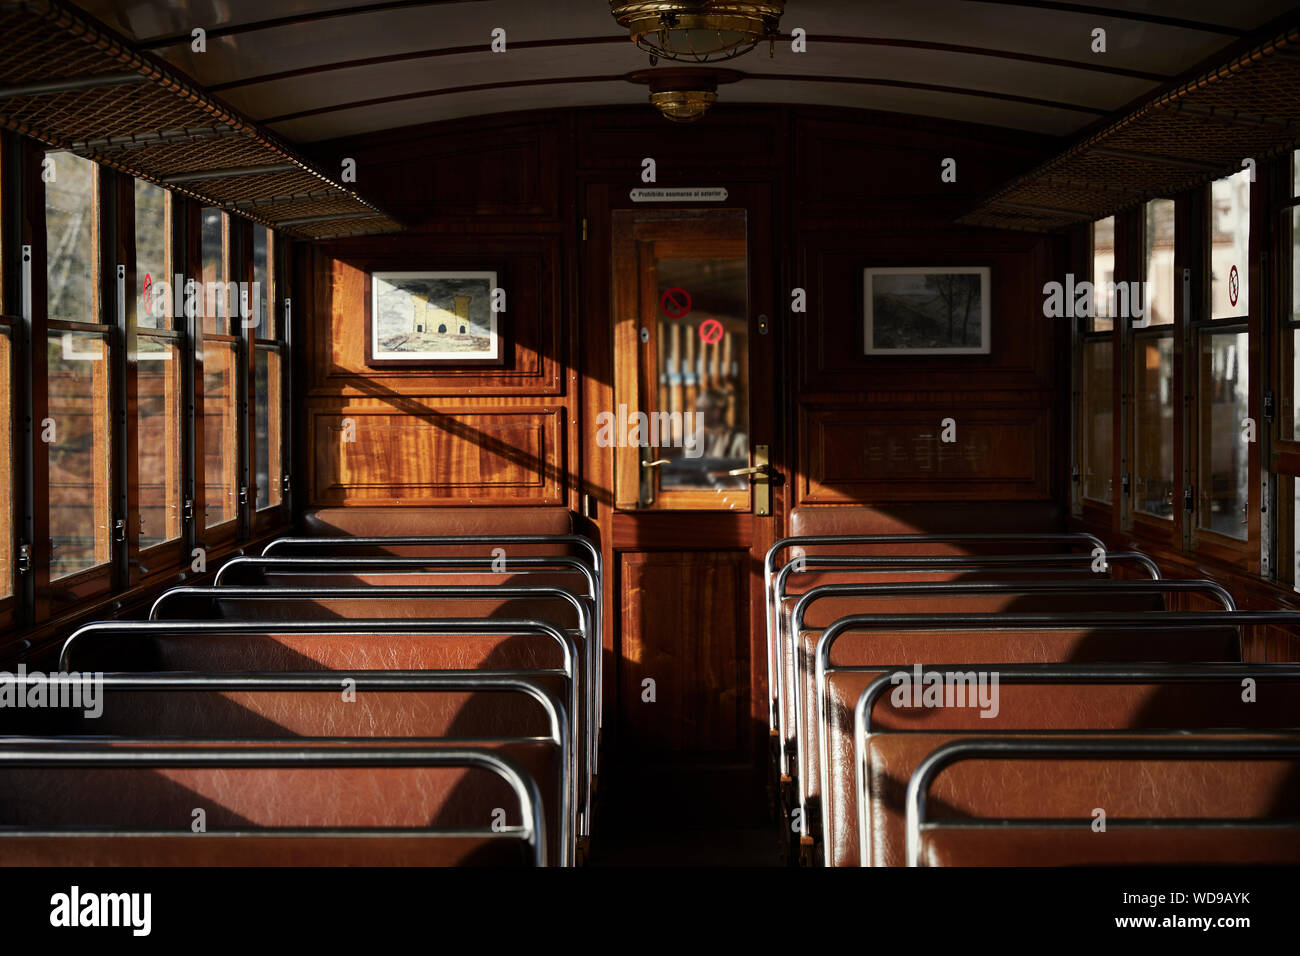 Interior of old fashioned Tren Soller train carriage Stock Photo